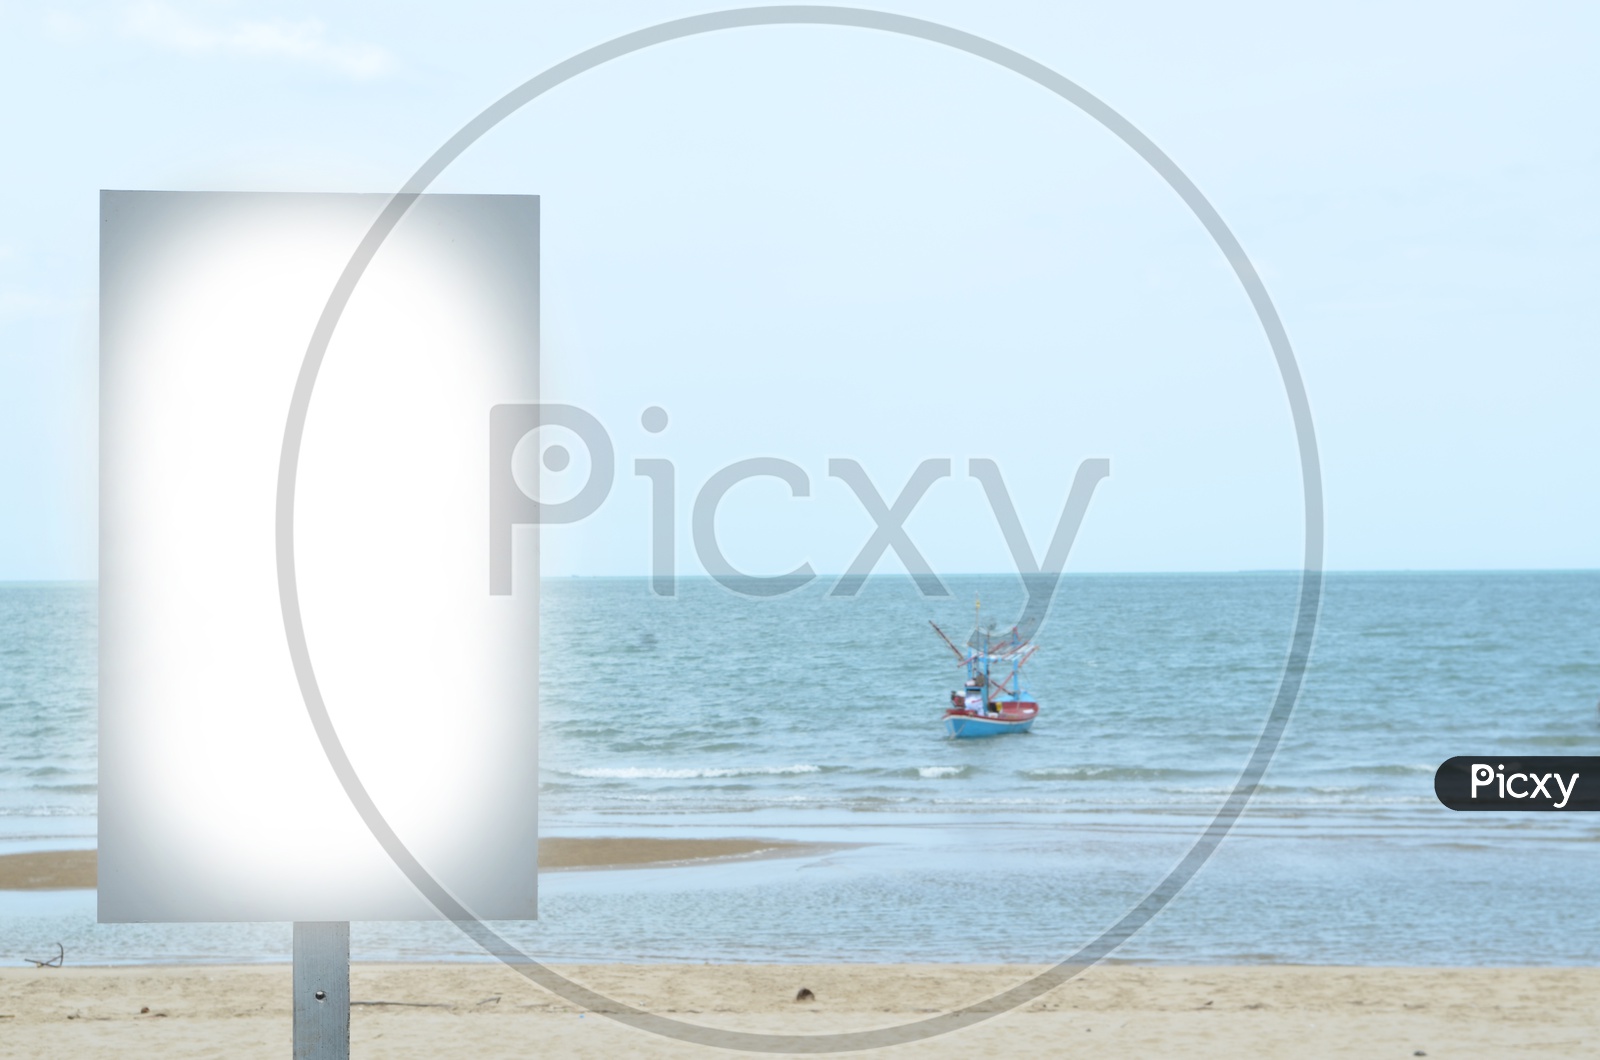 Advertising Blank Billboard With Tropical Sea and Boat